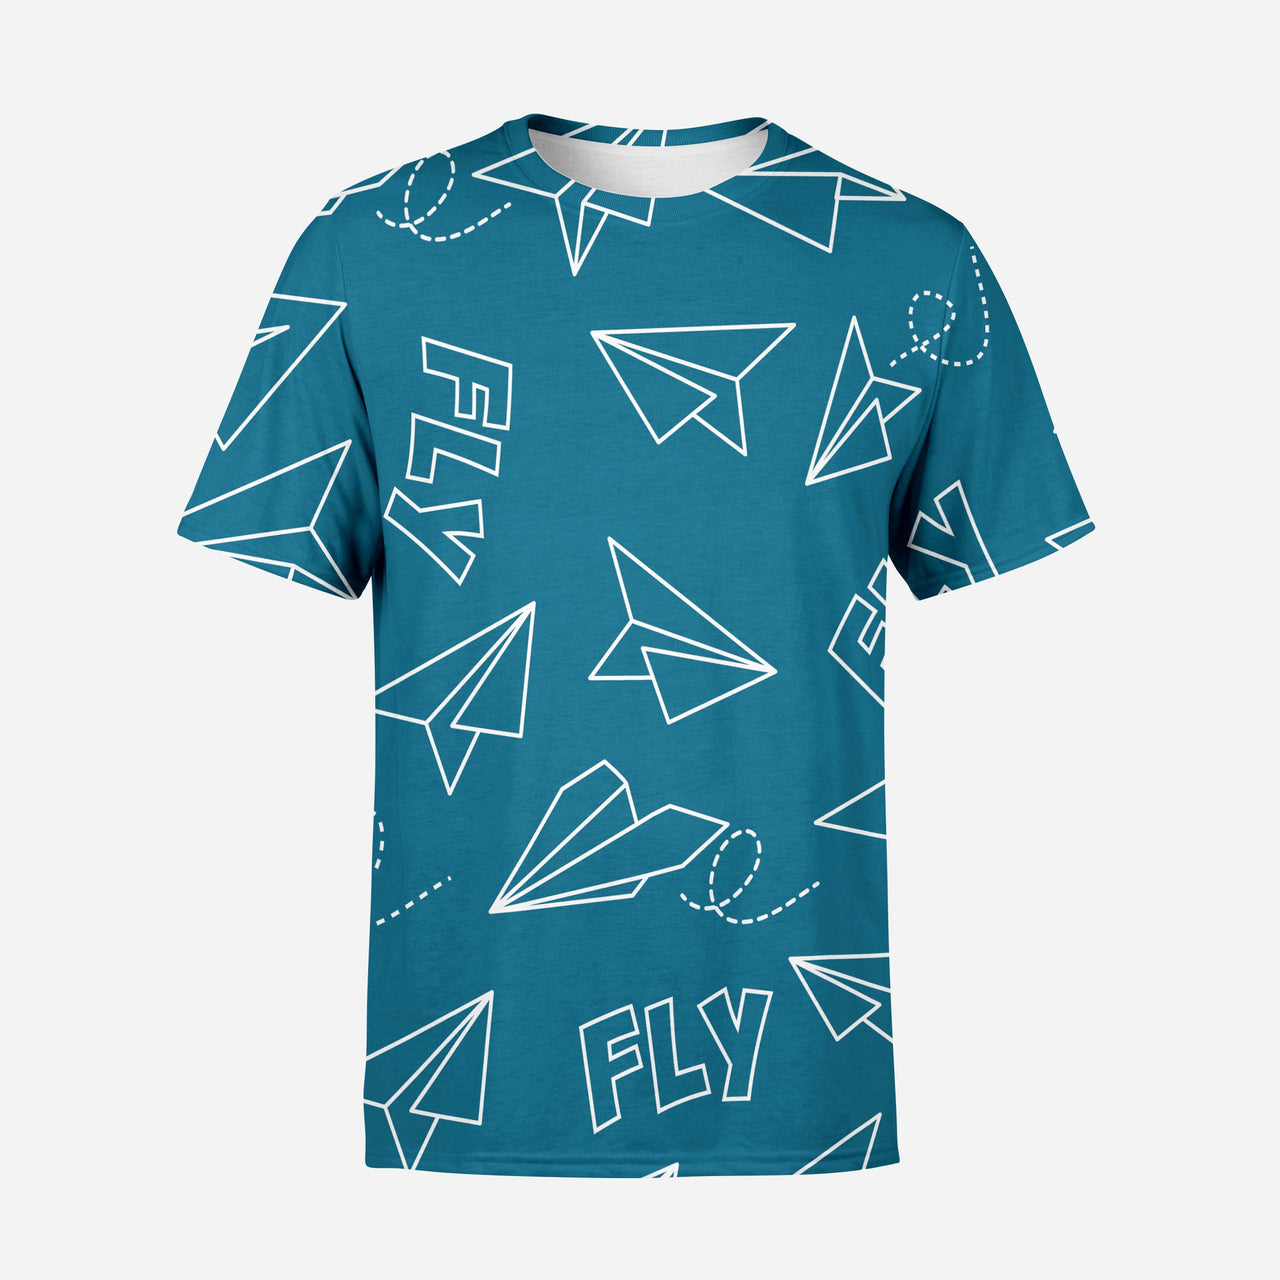 Paper Airplane & Fly Printed 3D T-Shirts